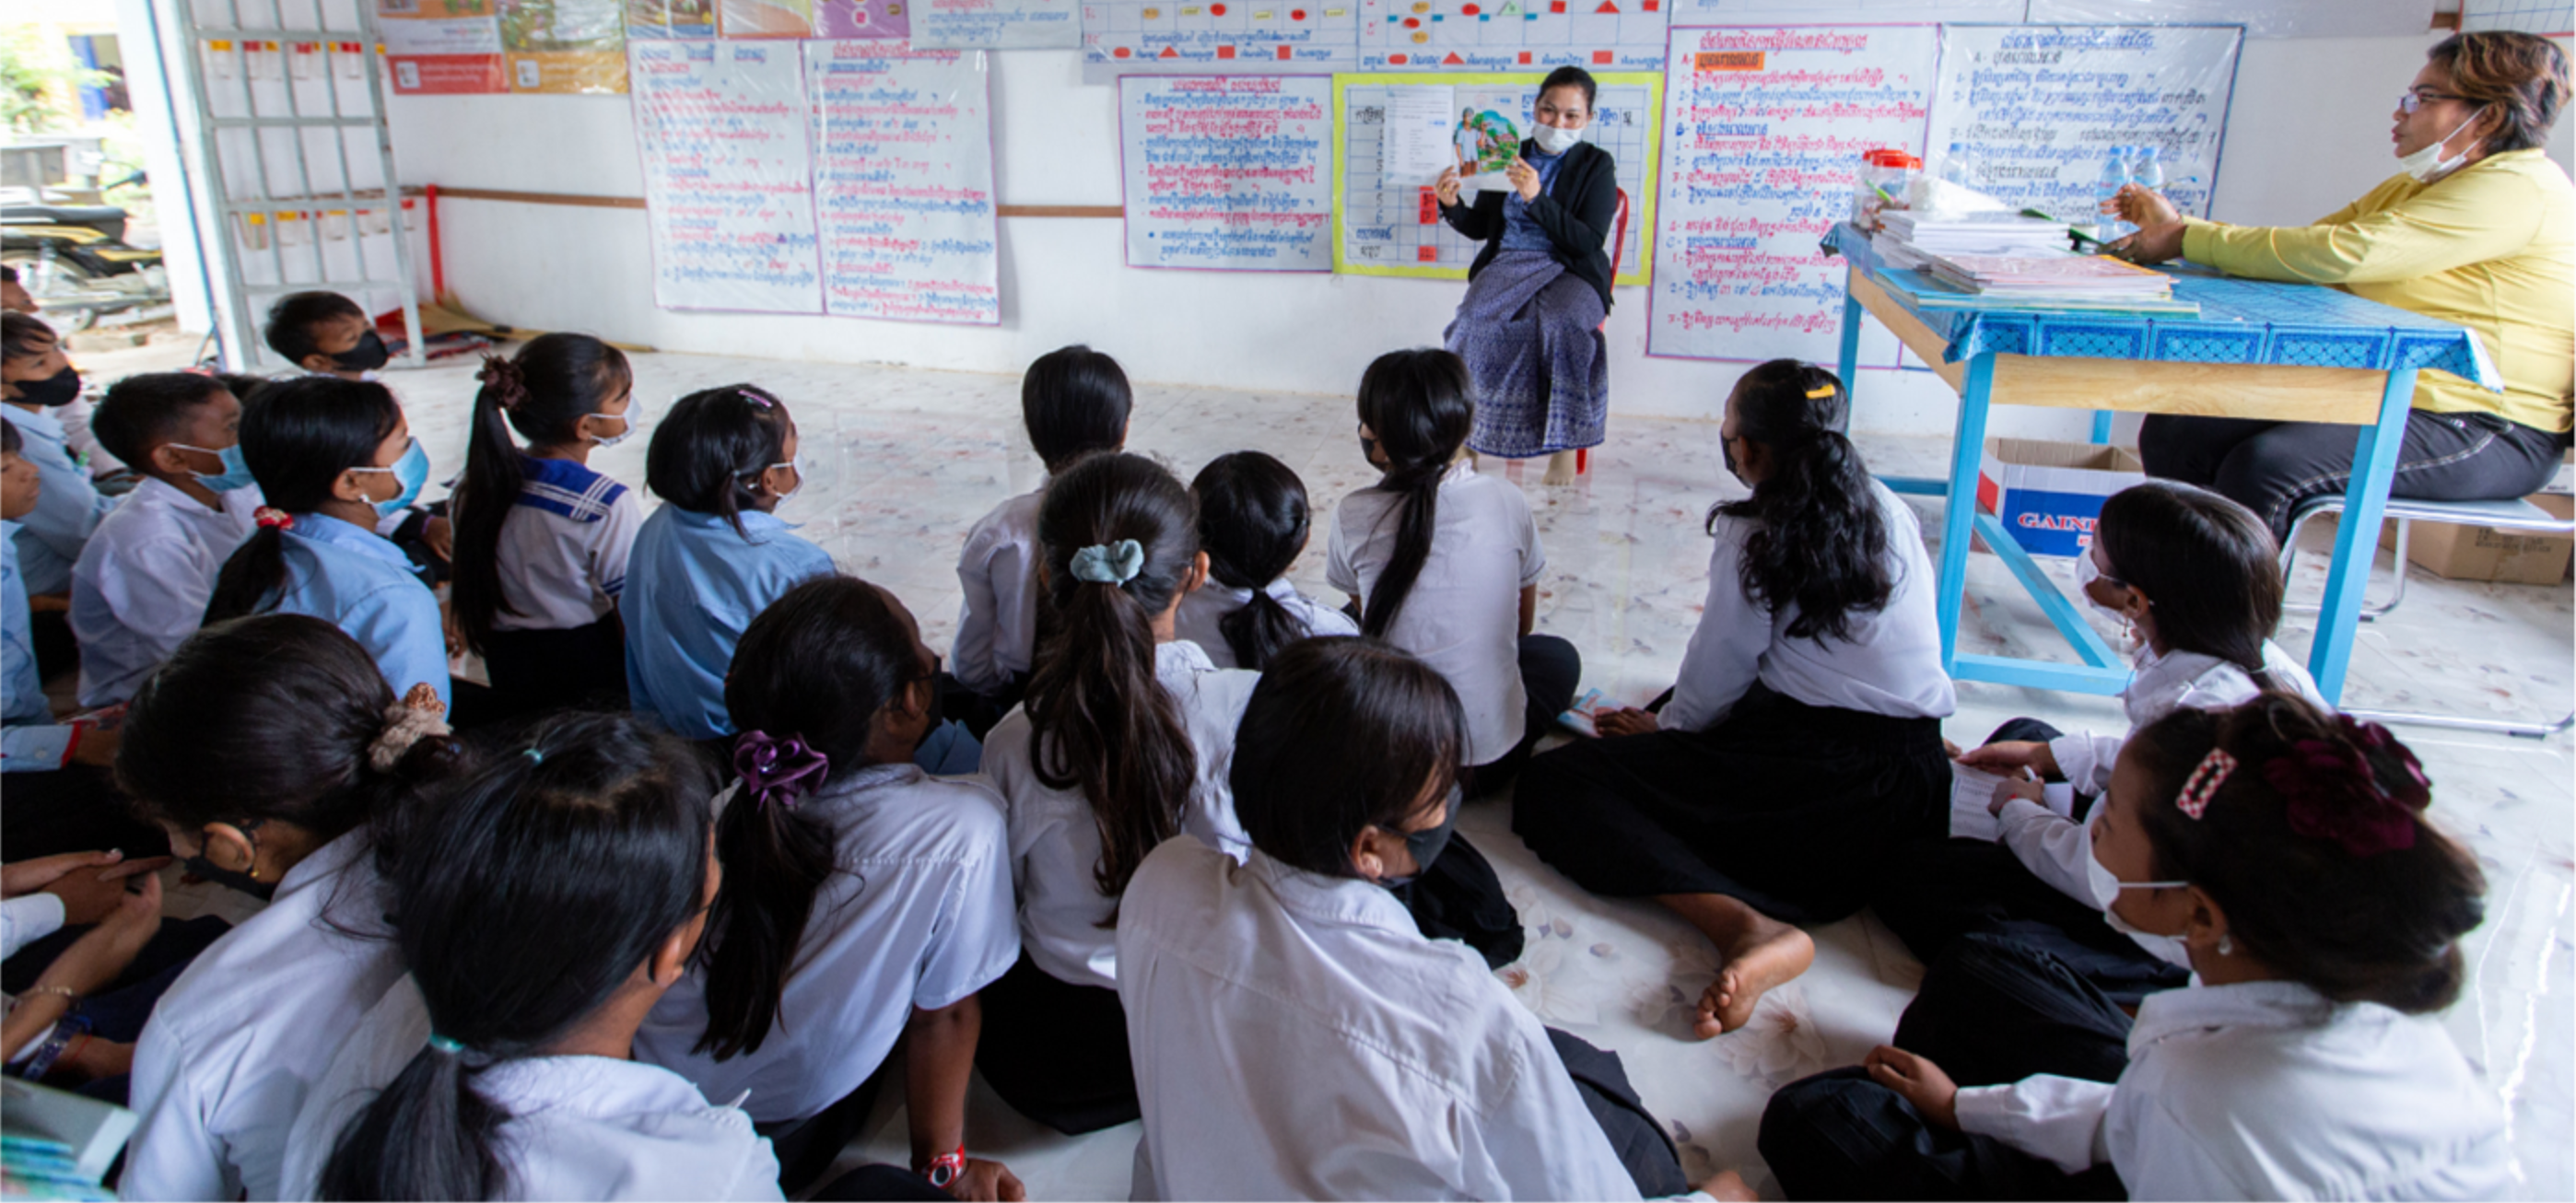 Children engaged in a read aloud in Room to Read’s Literacy Program in Cambodia